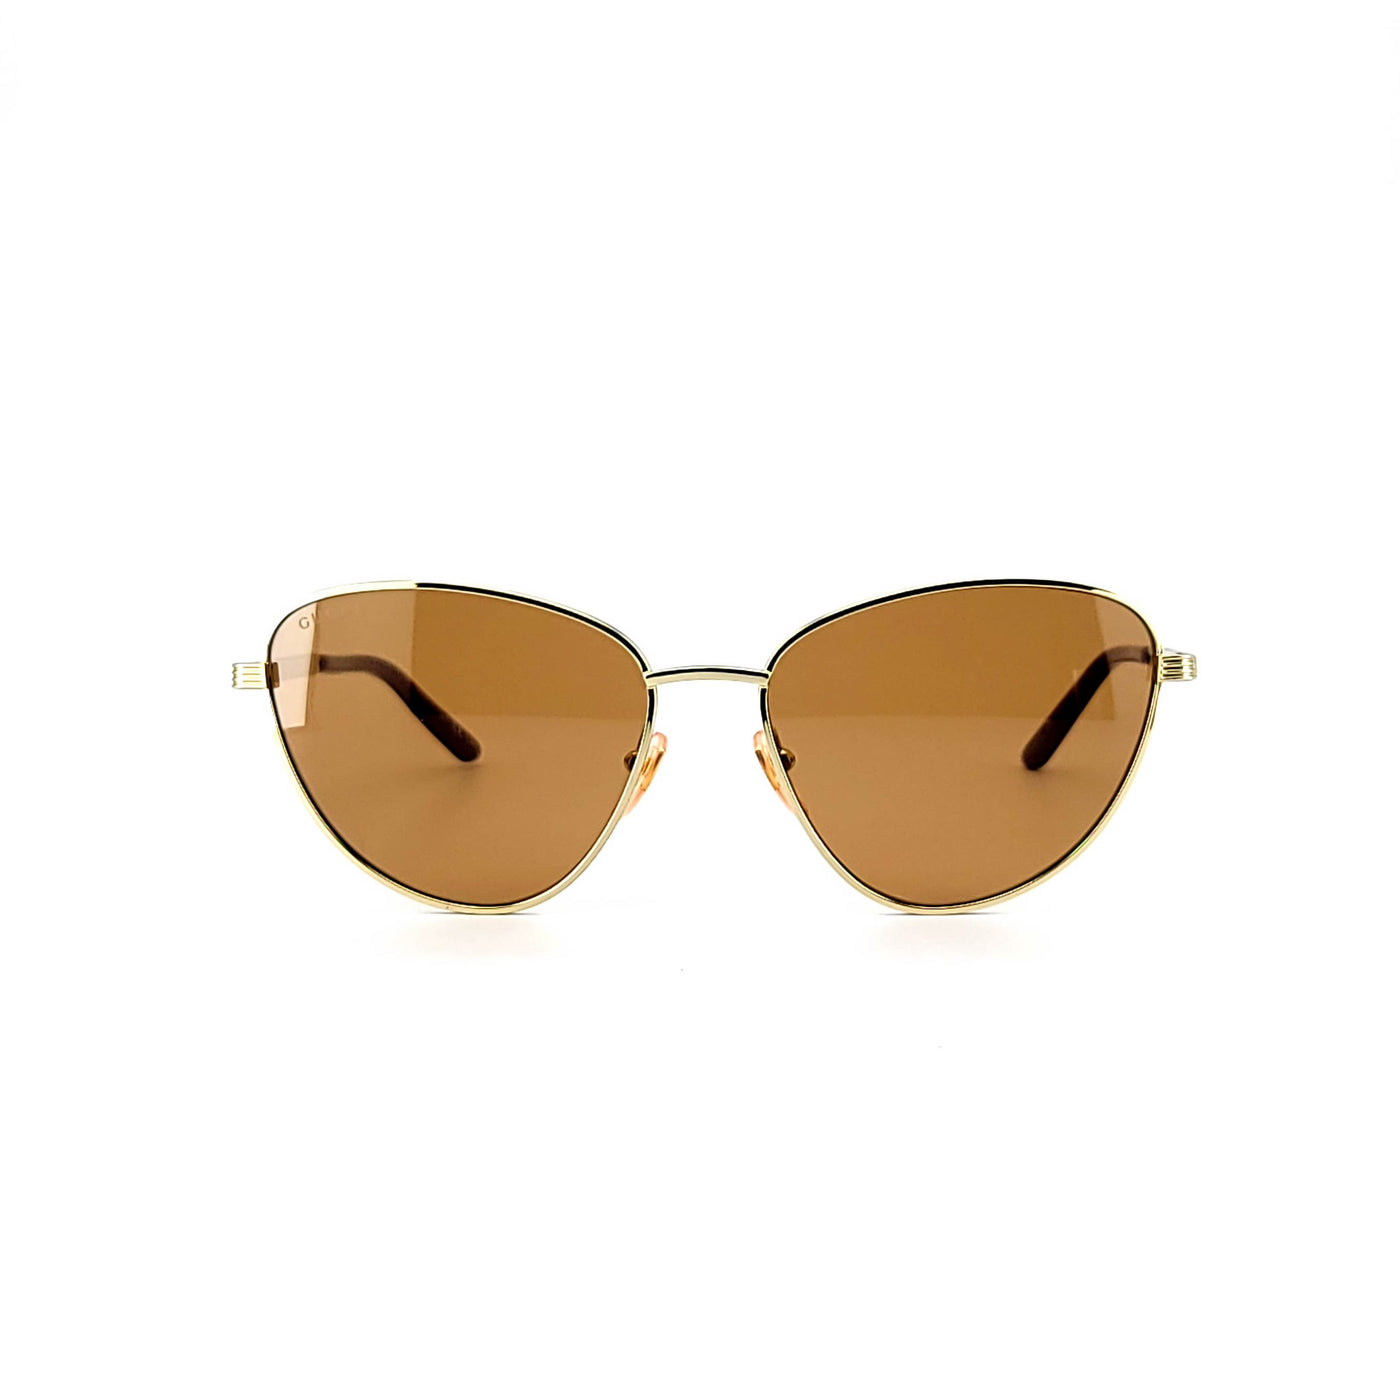 Gucci GG 0803S/002 | Sunglasses - Vision Express Optical Philippines